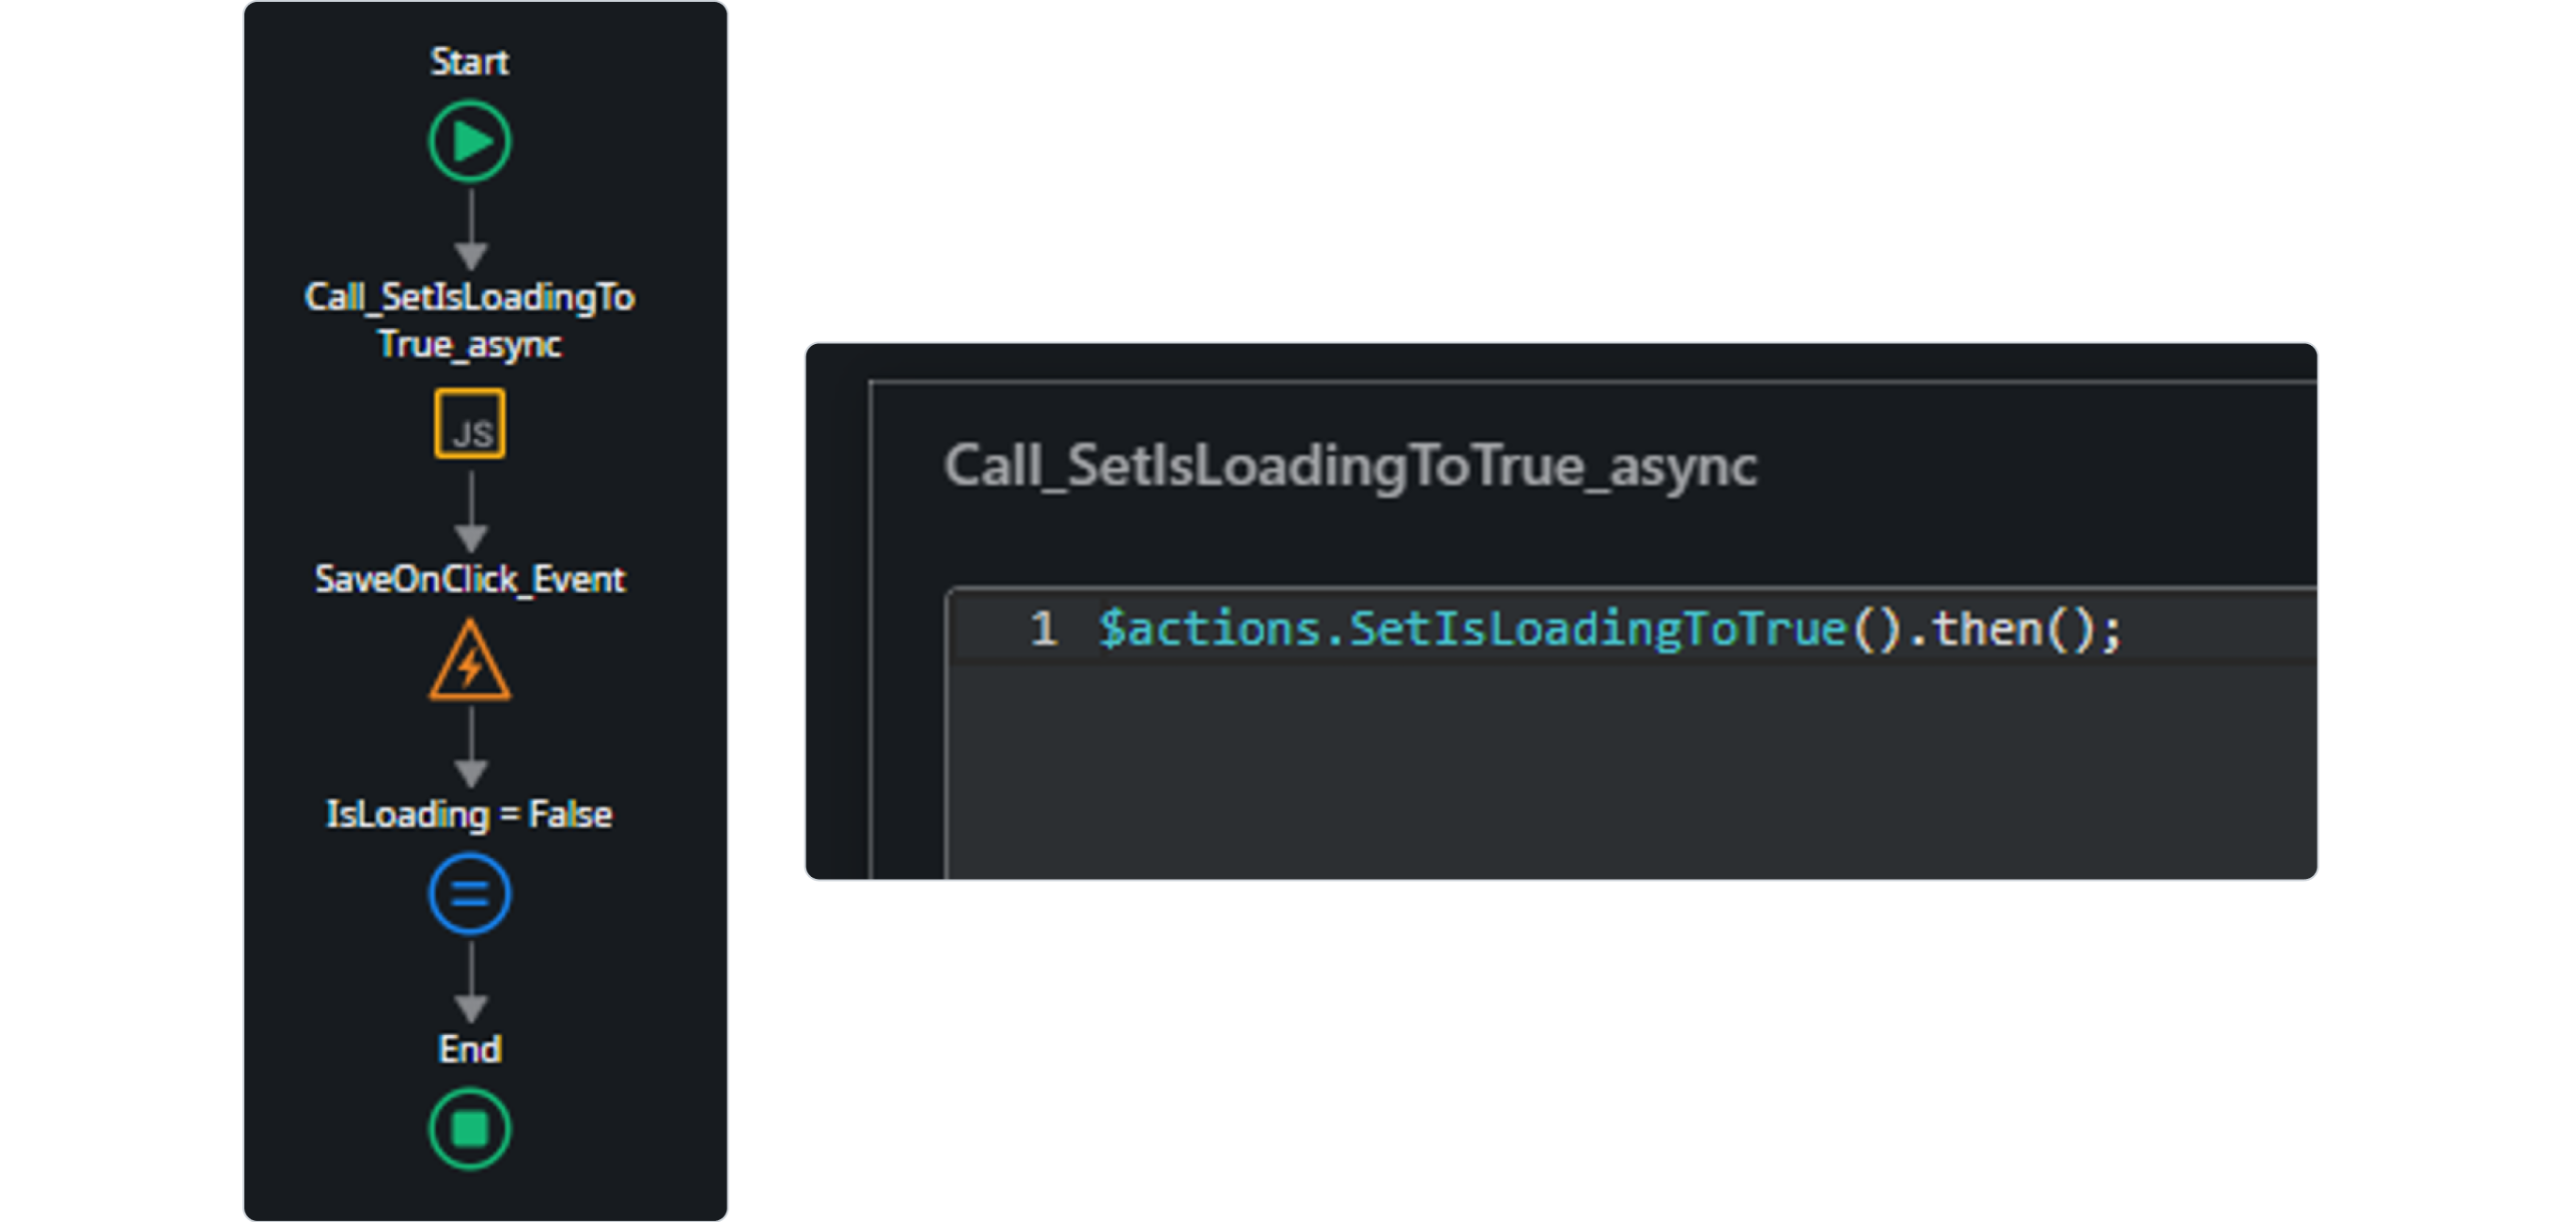 A screenshot of a process flow in Service Studio and a second screenshot to its right withe code “$actions.SetIsLoadingToTrue().then();”